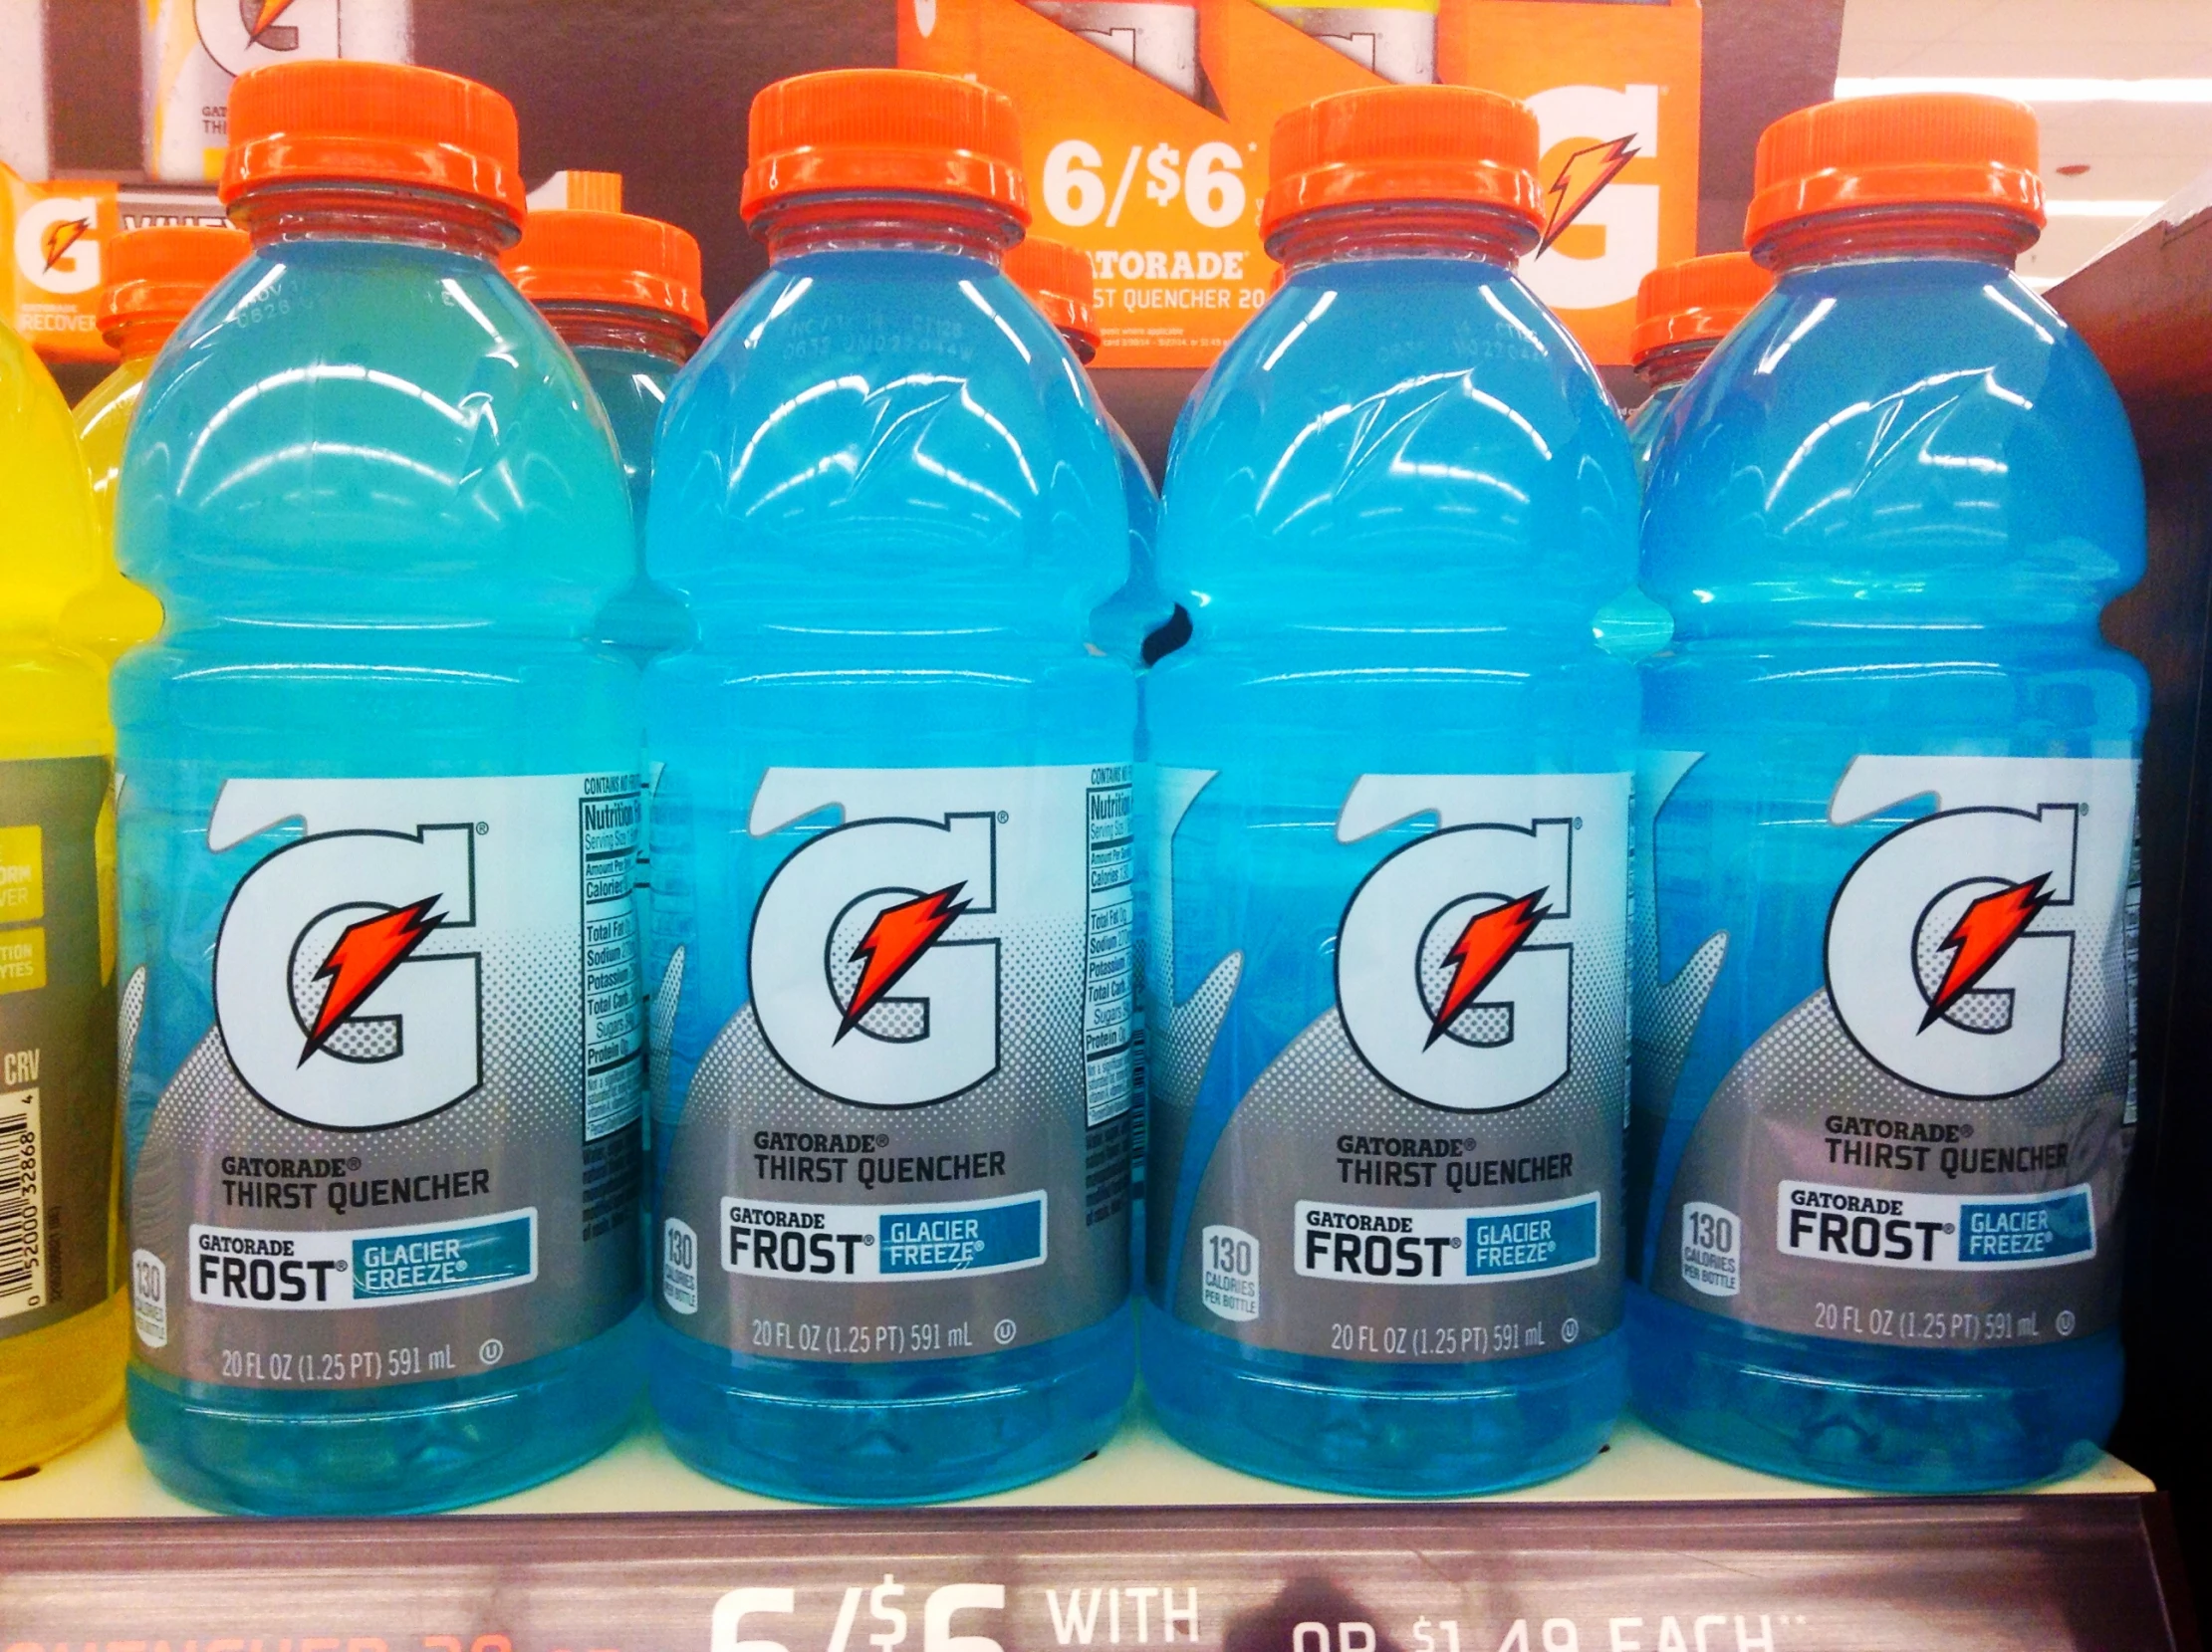 gatorade flavored water bottles are pictured in this po